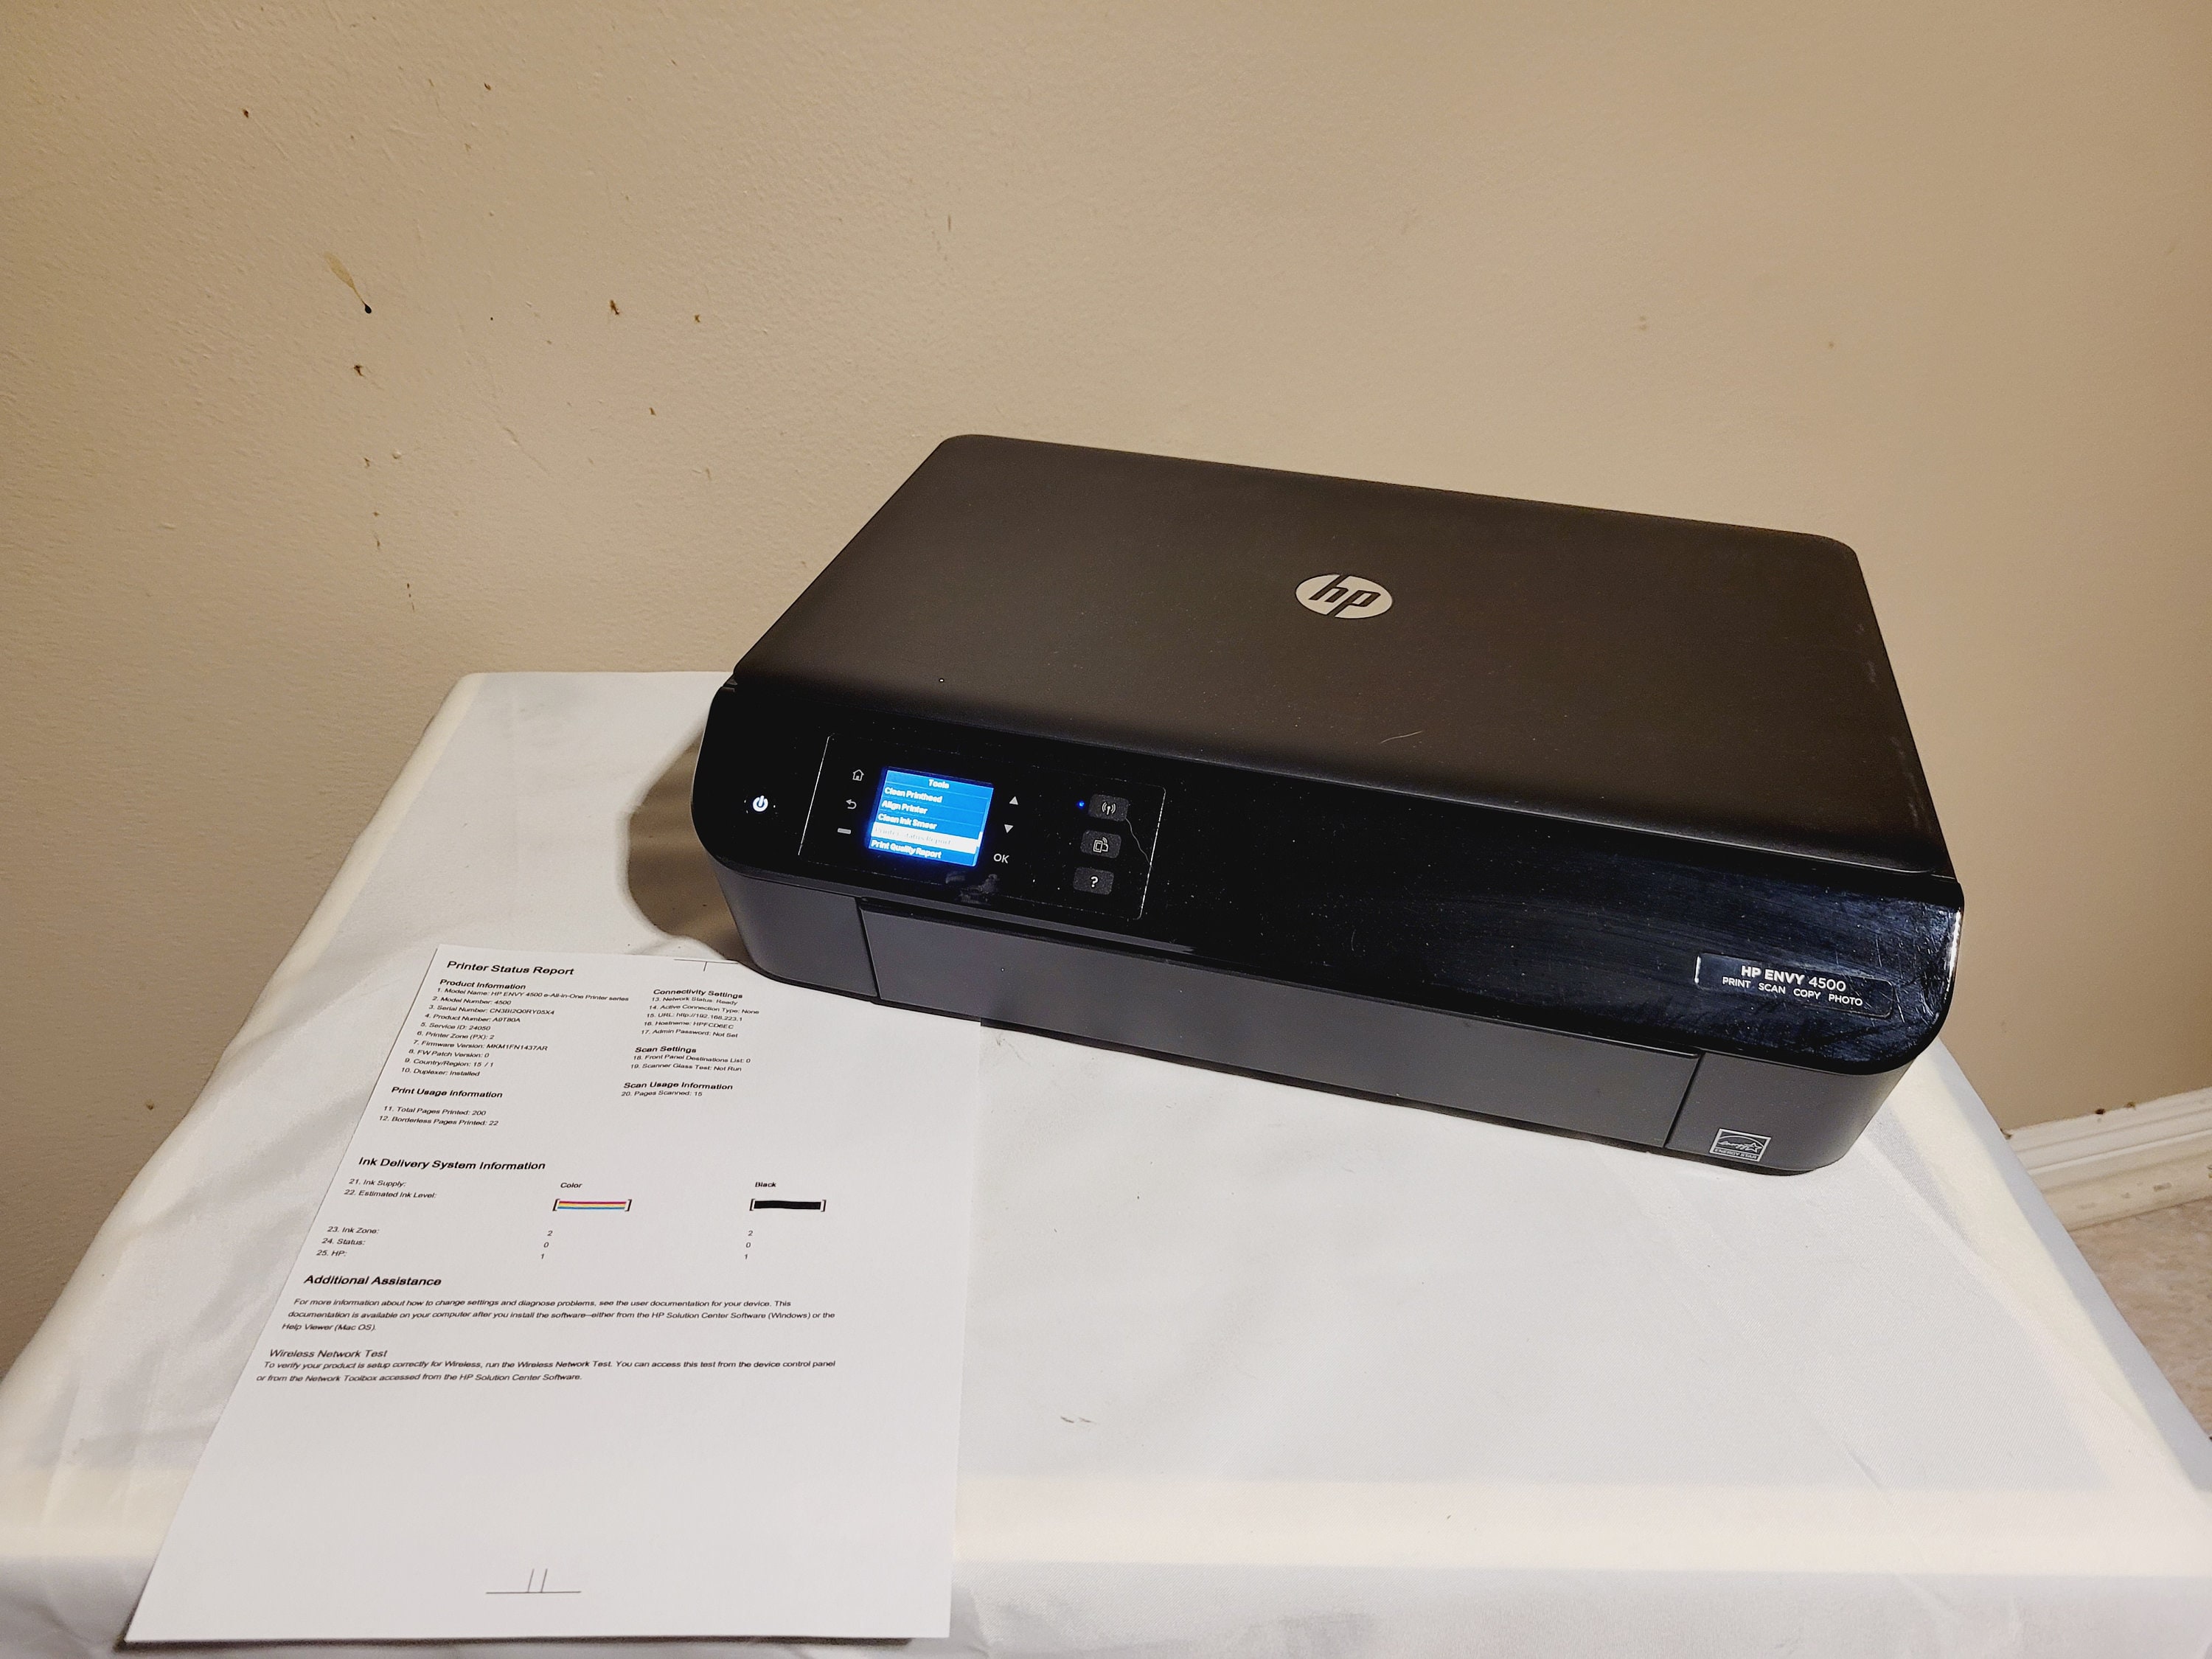 Envy 4500e All-in-one Print Scan 200 - Etsy